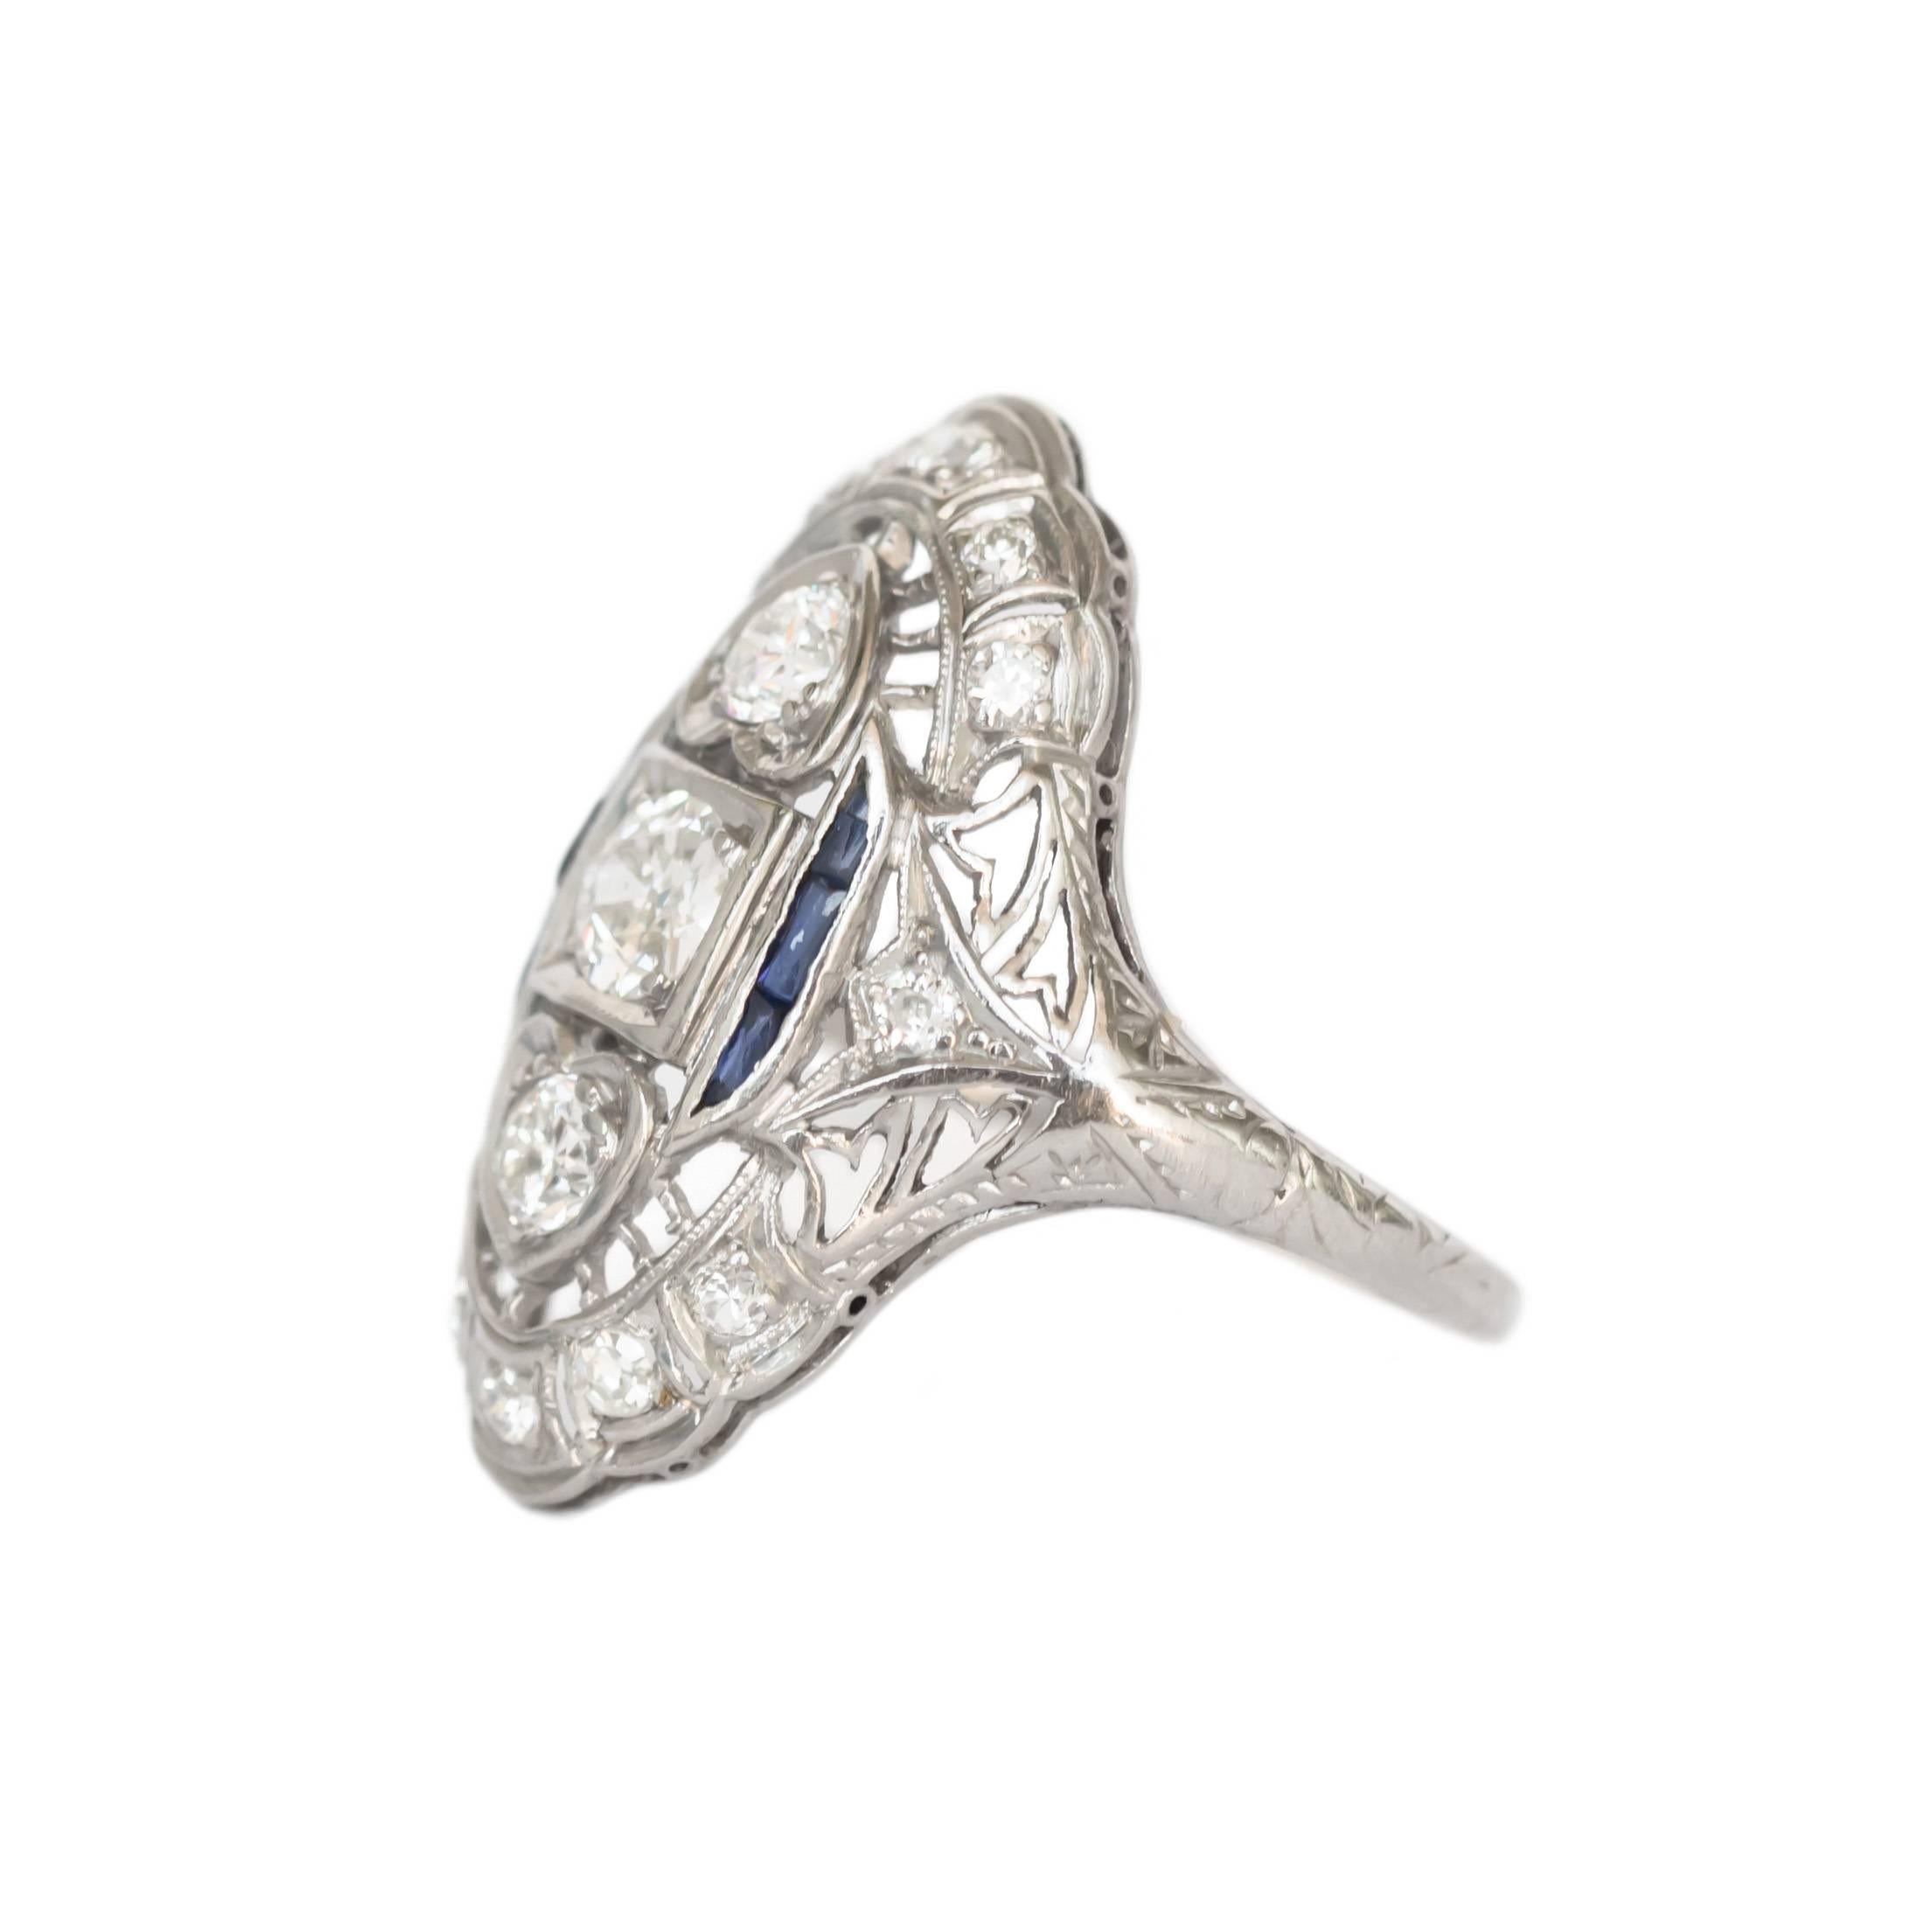 Item Details: 
Ring Size: 6.5
Metal Type: Platinum
Weight: 4.2 grams

Stone Details: 
Shape: Old European Brilliant 
Total Carat Weight: .80 carat total weight
Color: F
Clarity: VS

Color Stone Details: 
Type: Sapphire (NATURAL)
Shape: French Cut